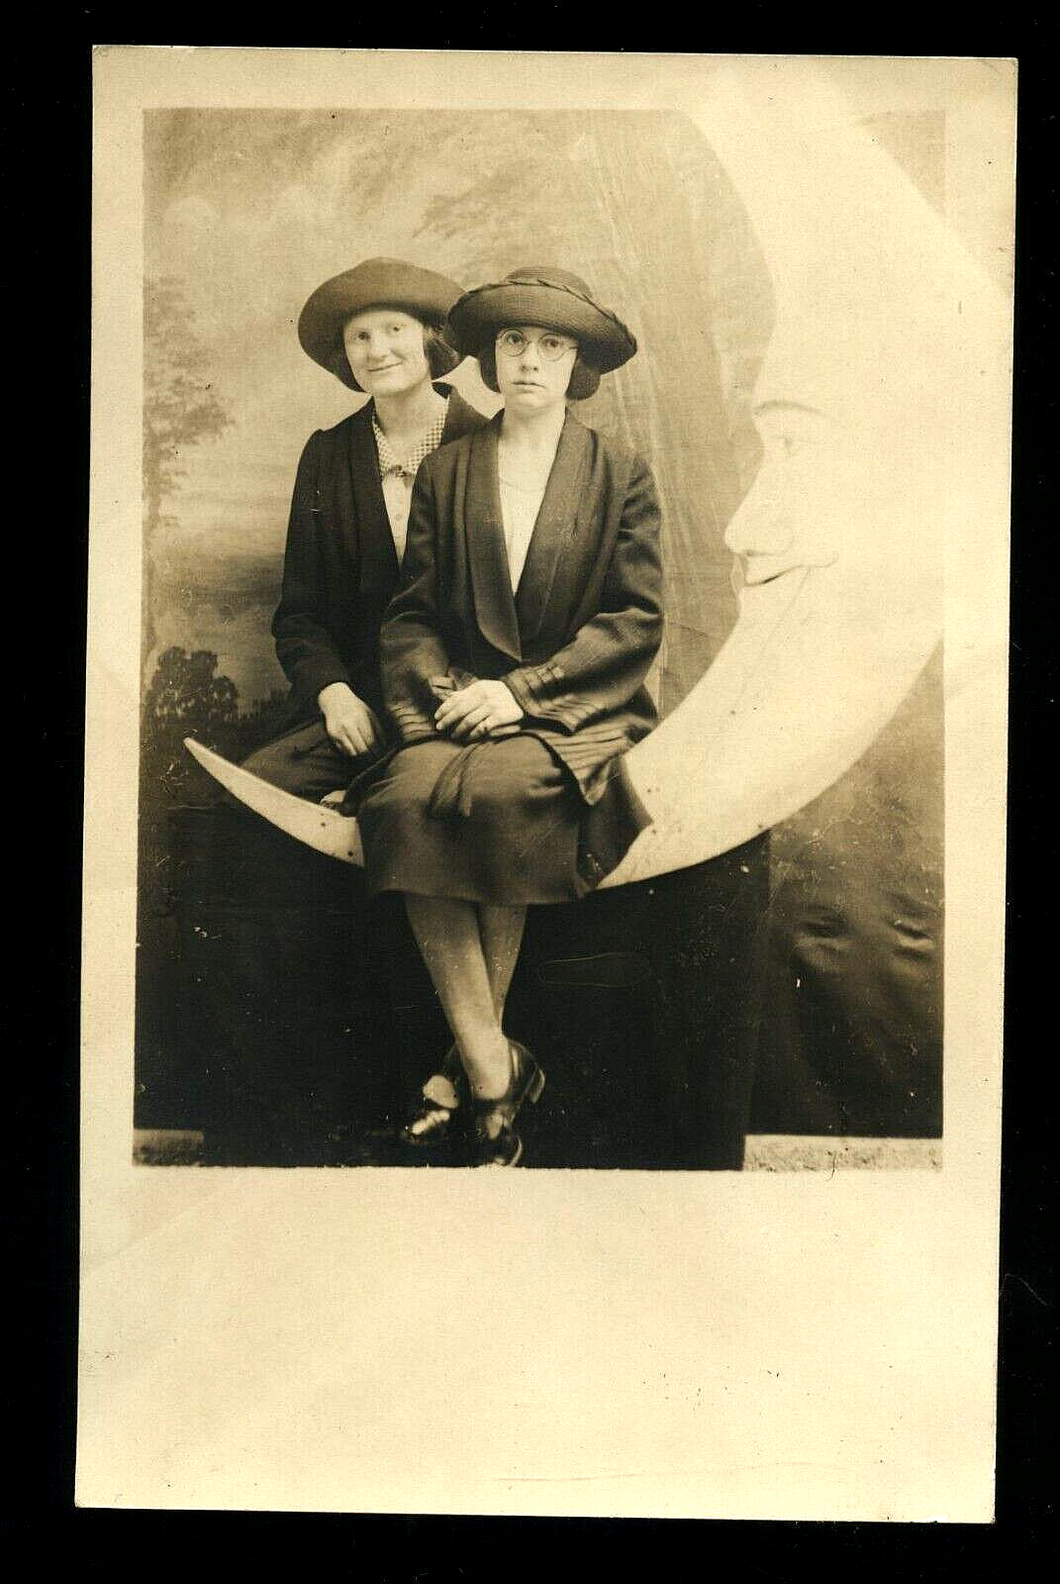 Two Women Sitting On Paper / Prop Moon 1920s Vintage Photo RPPC